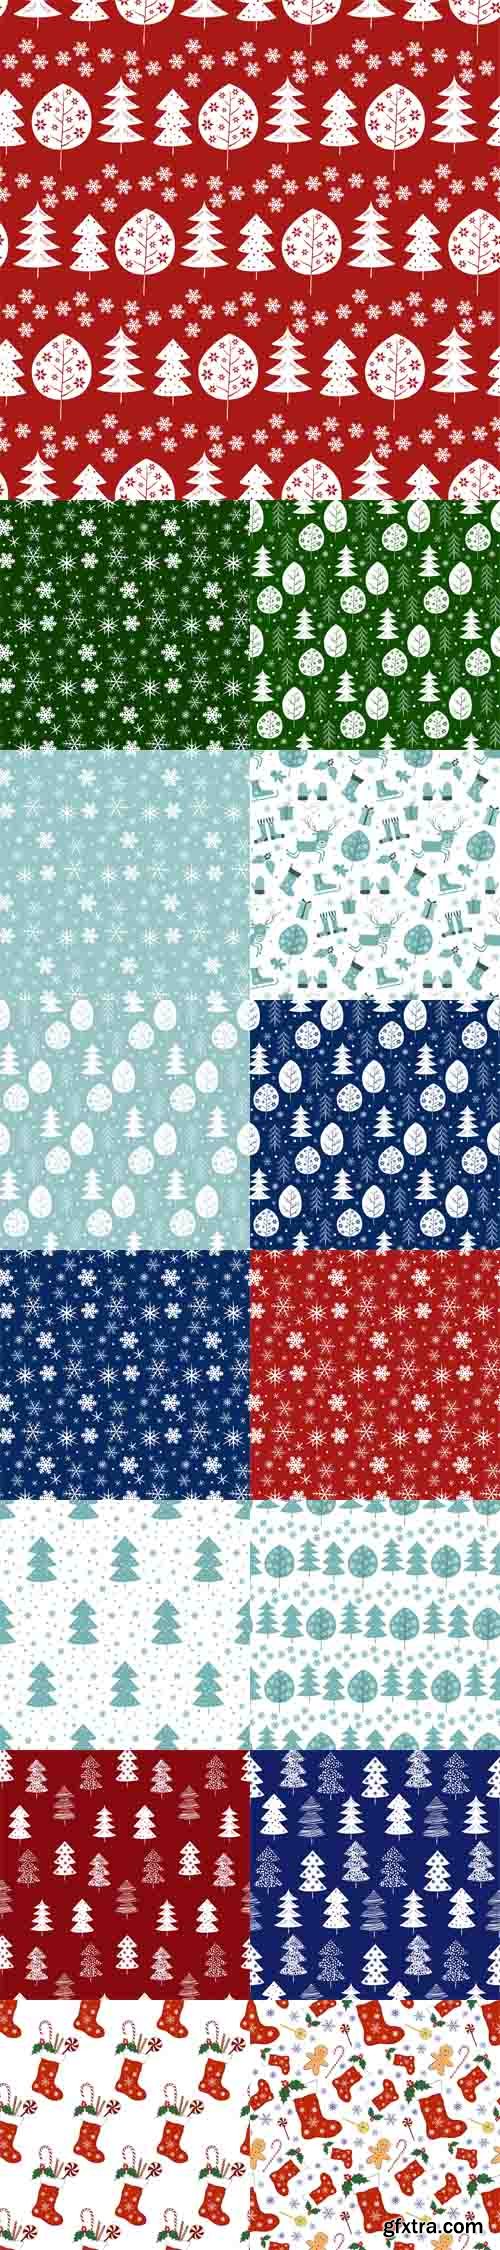 Vector Set - Christmas Seamless Pattern with Snowflakes and Trees